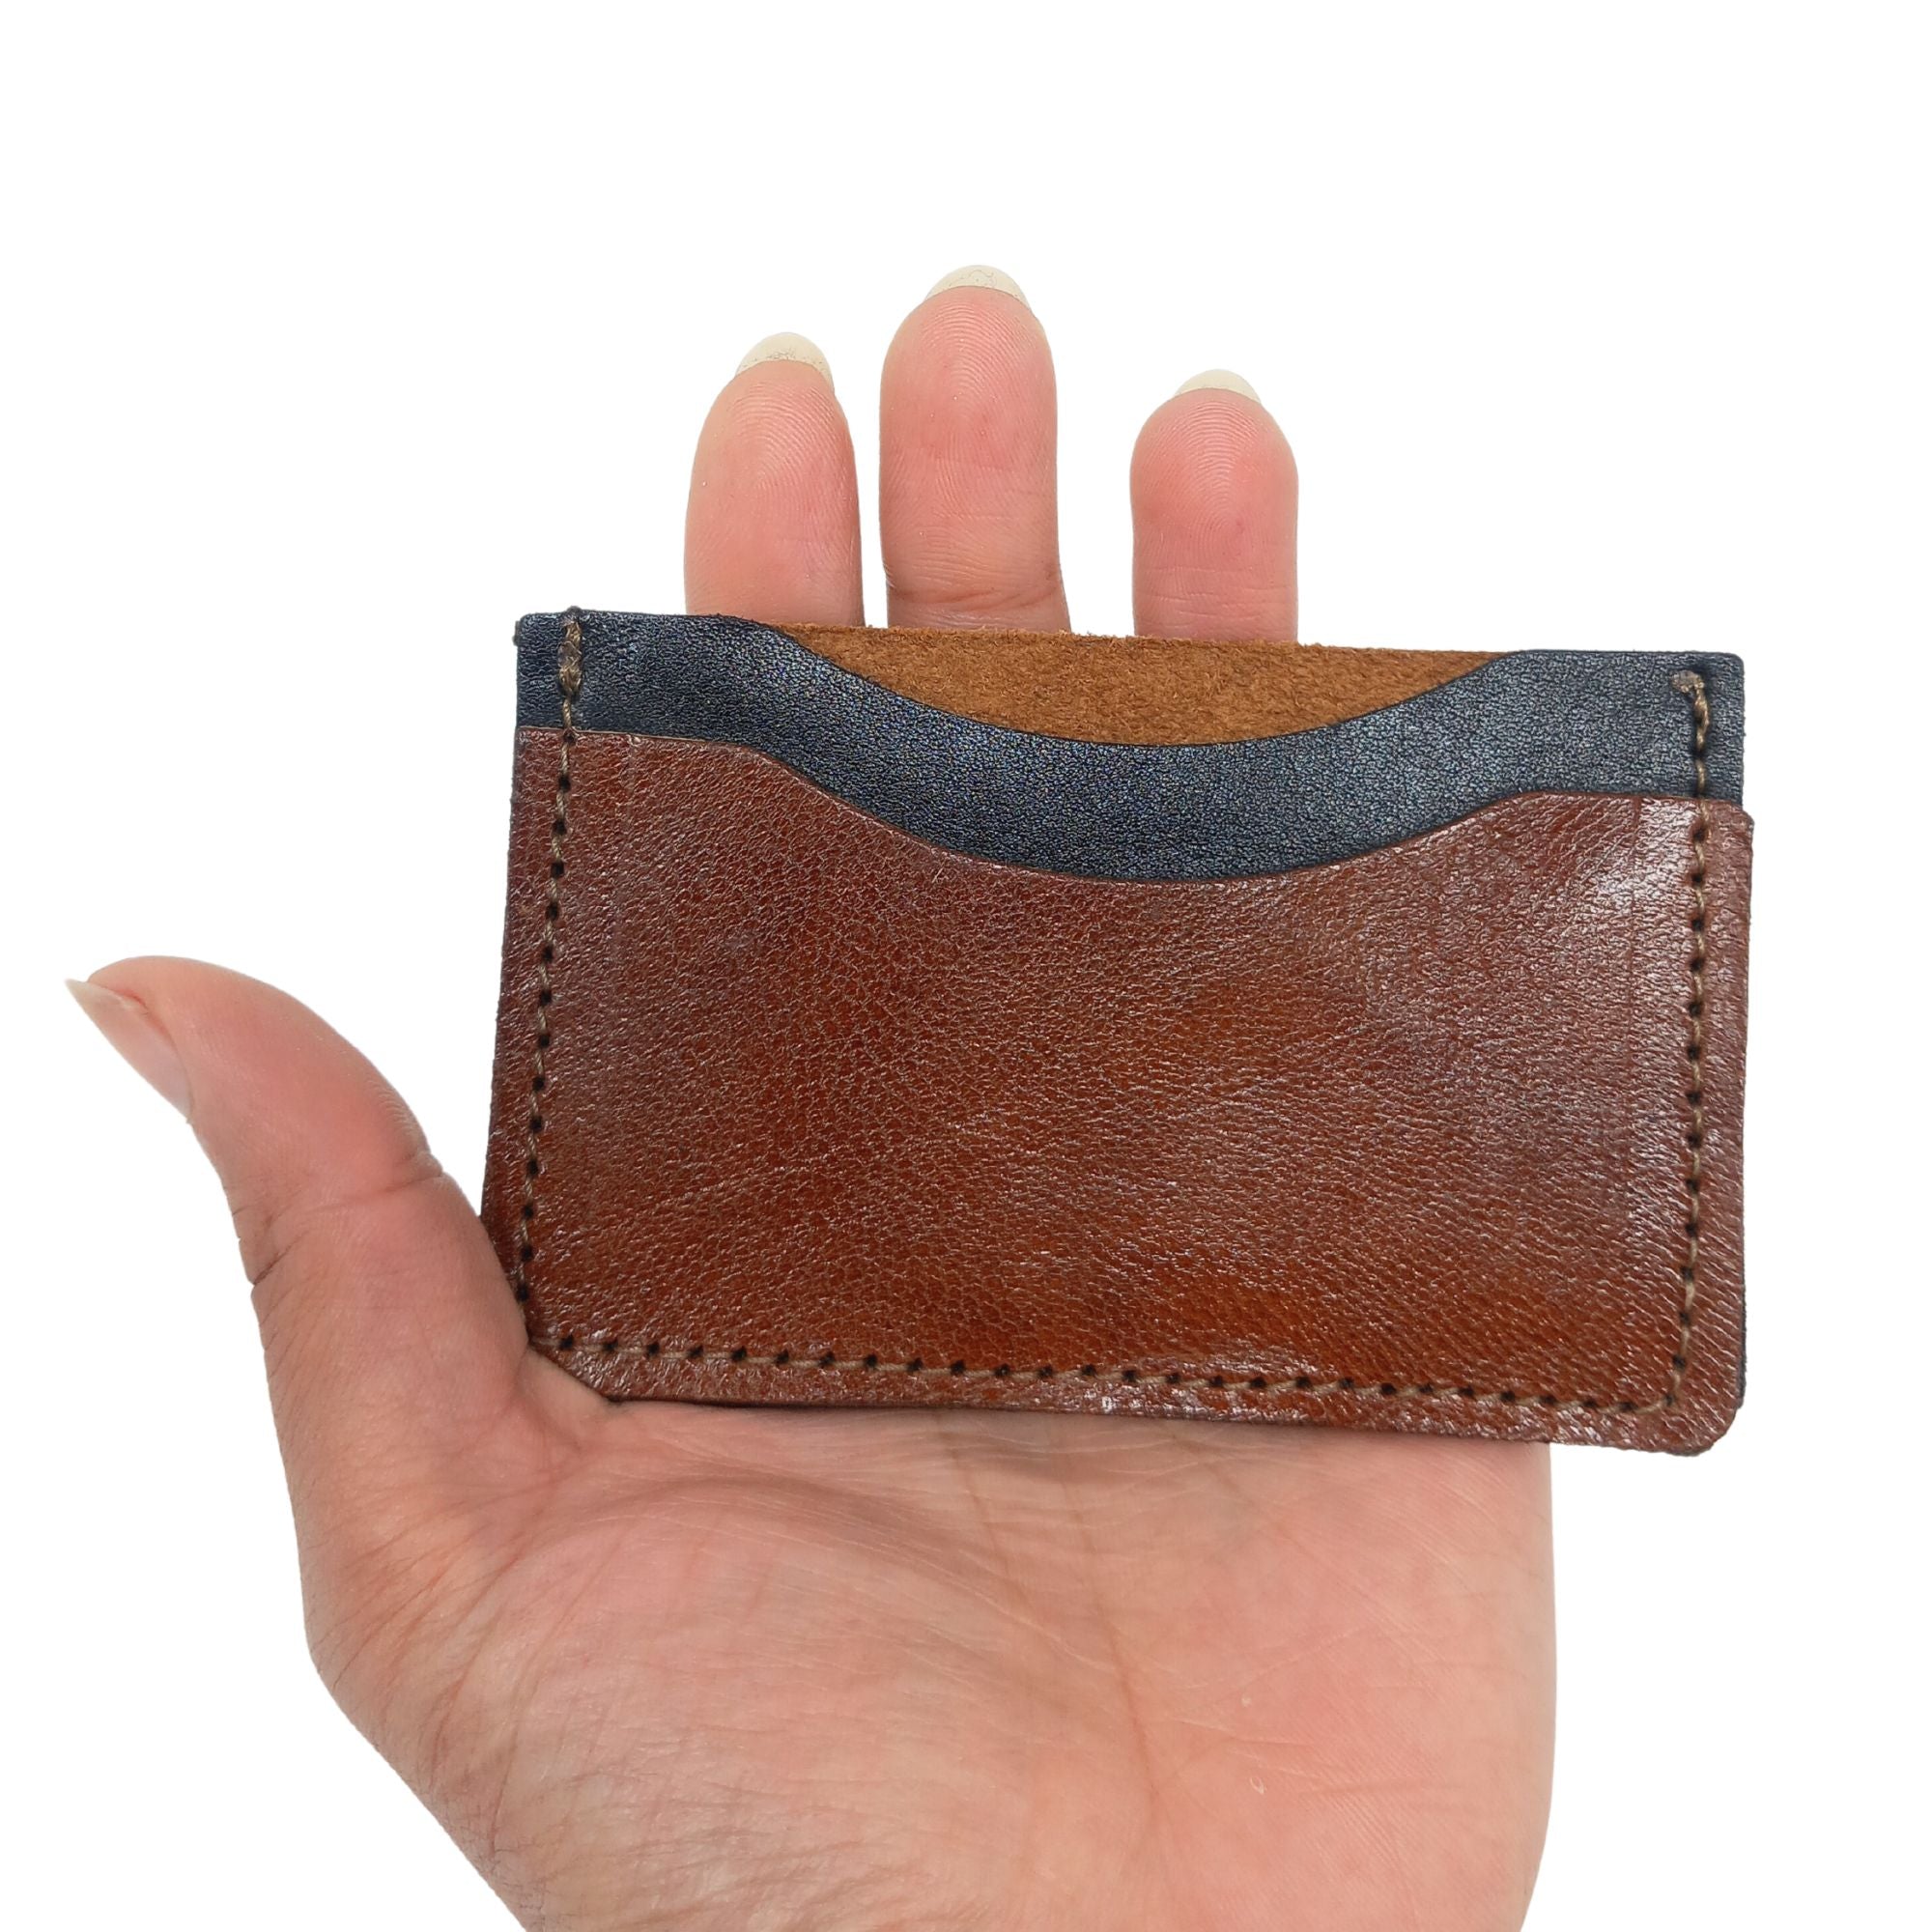 Minimal handcrafted leather card holder